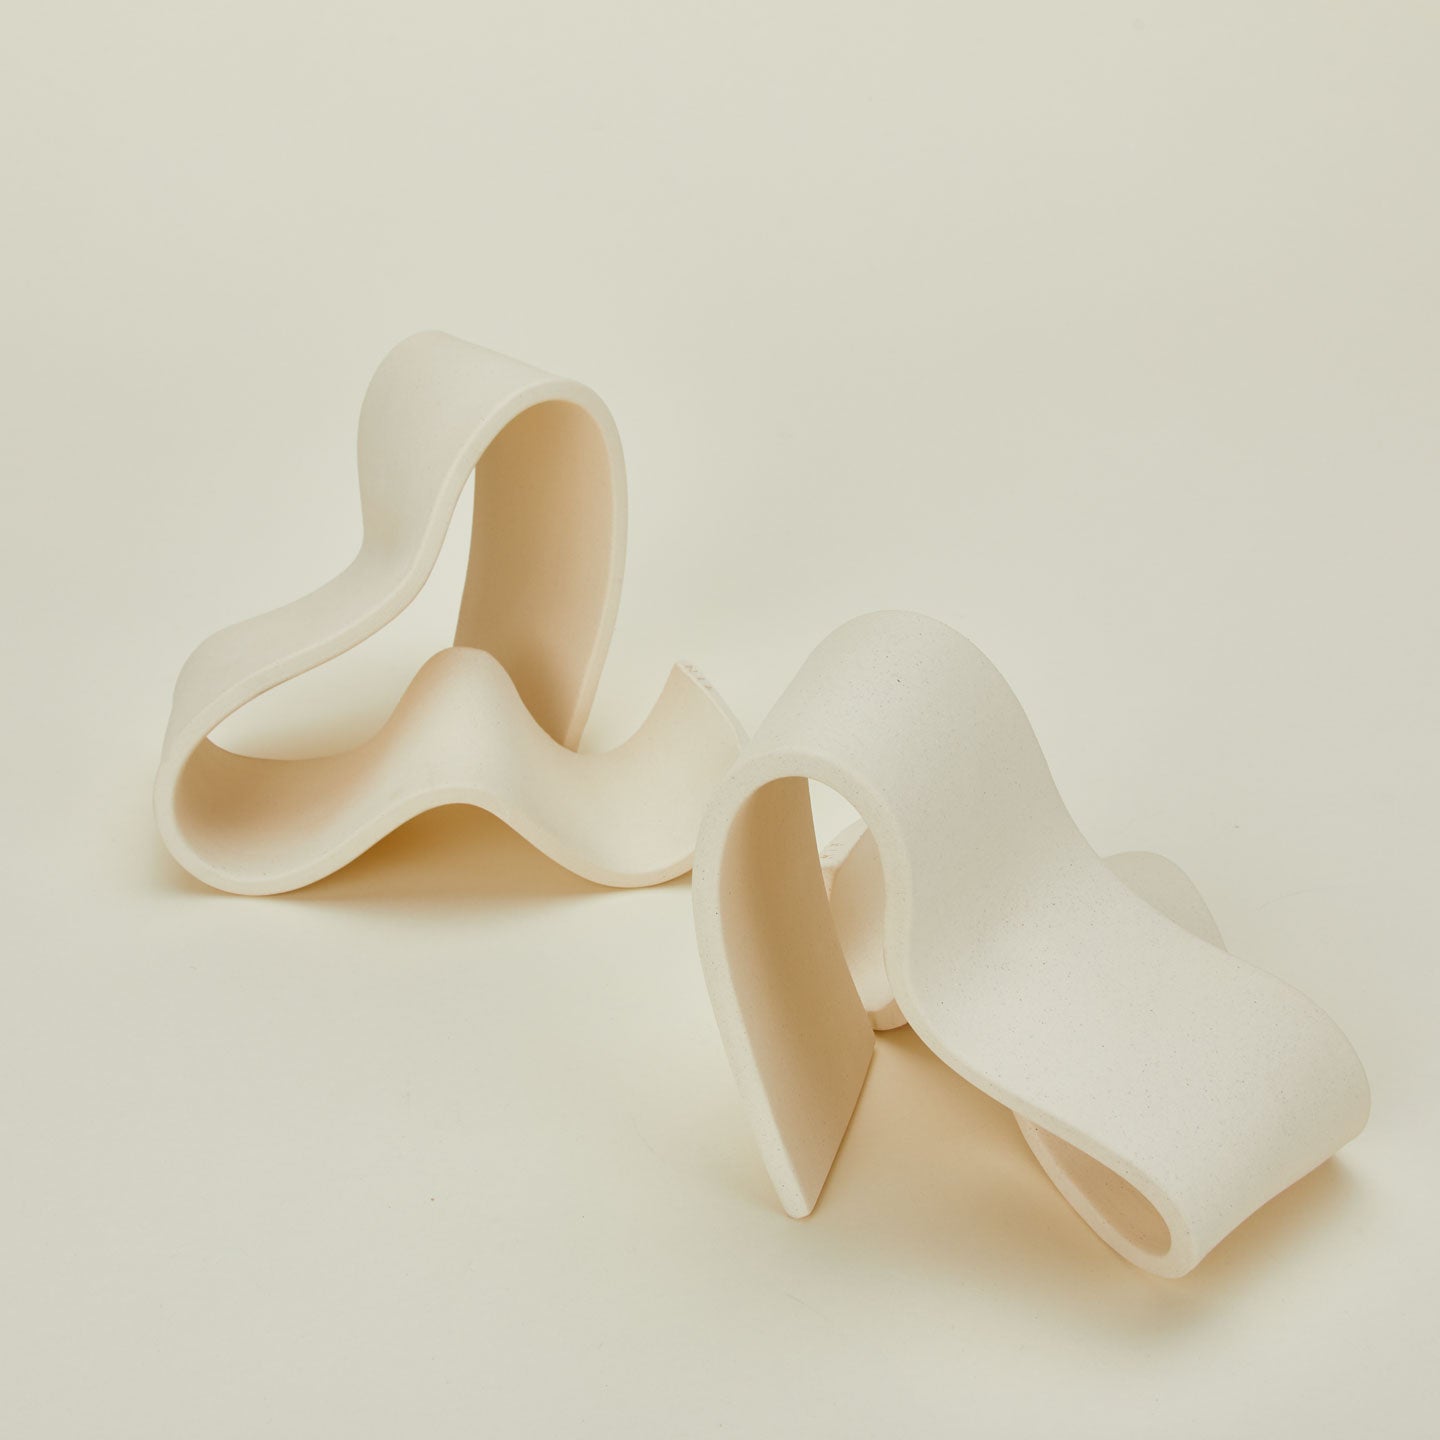 Close up of organically shaped neutral stoneware bookends.